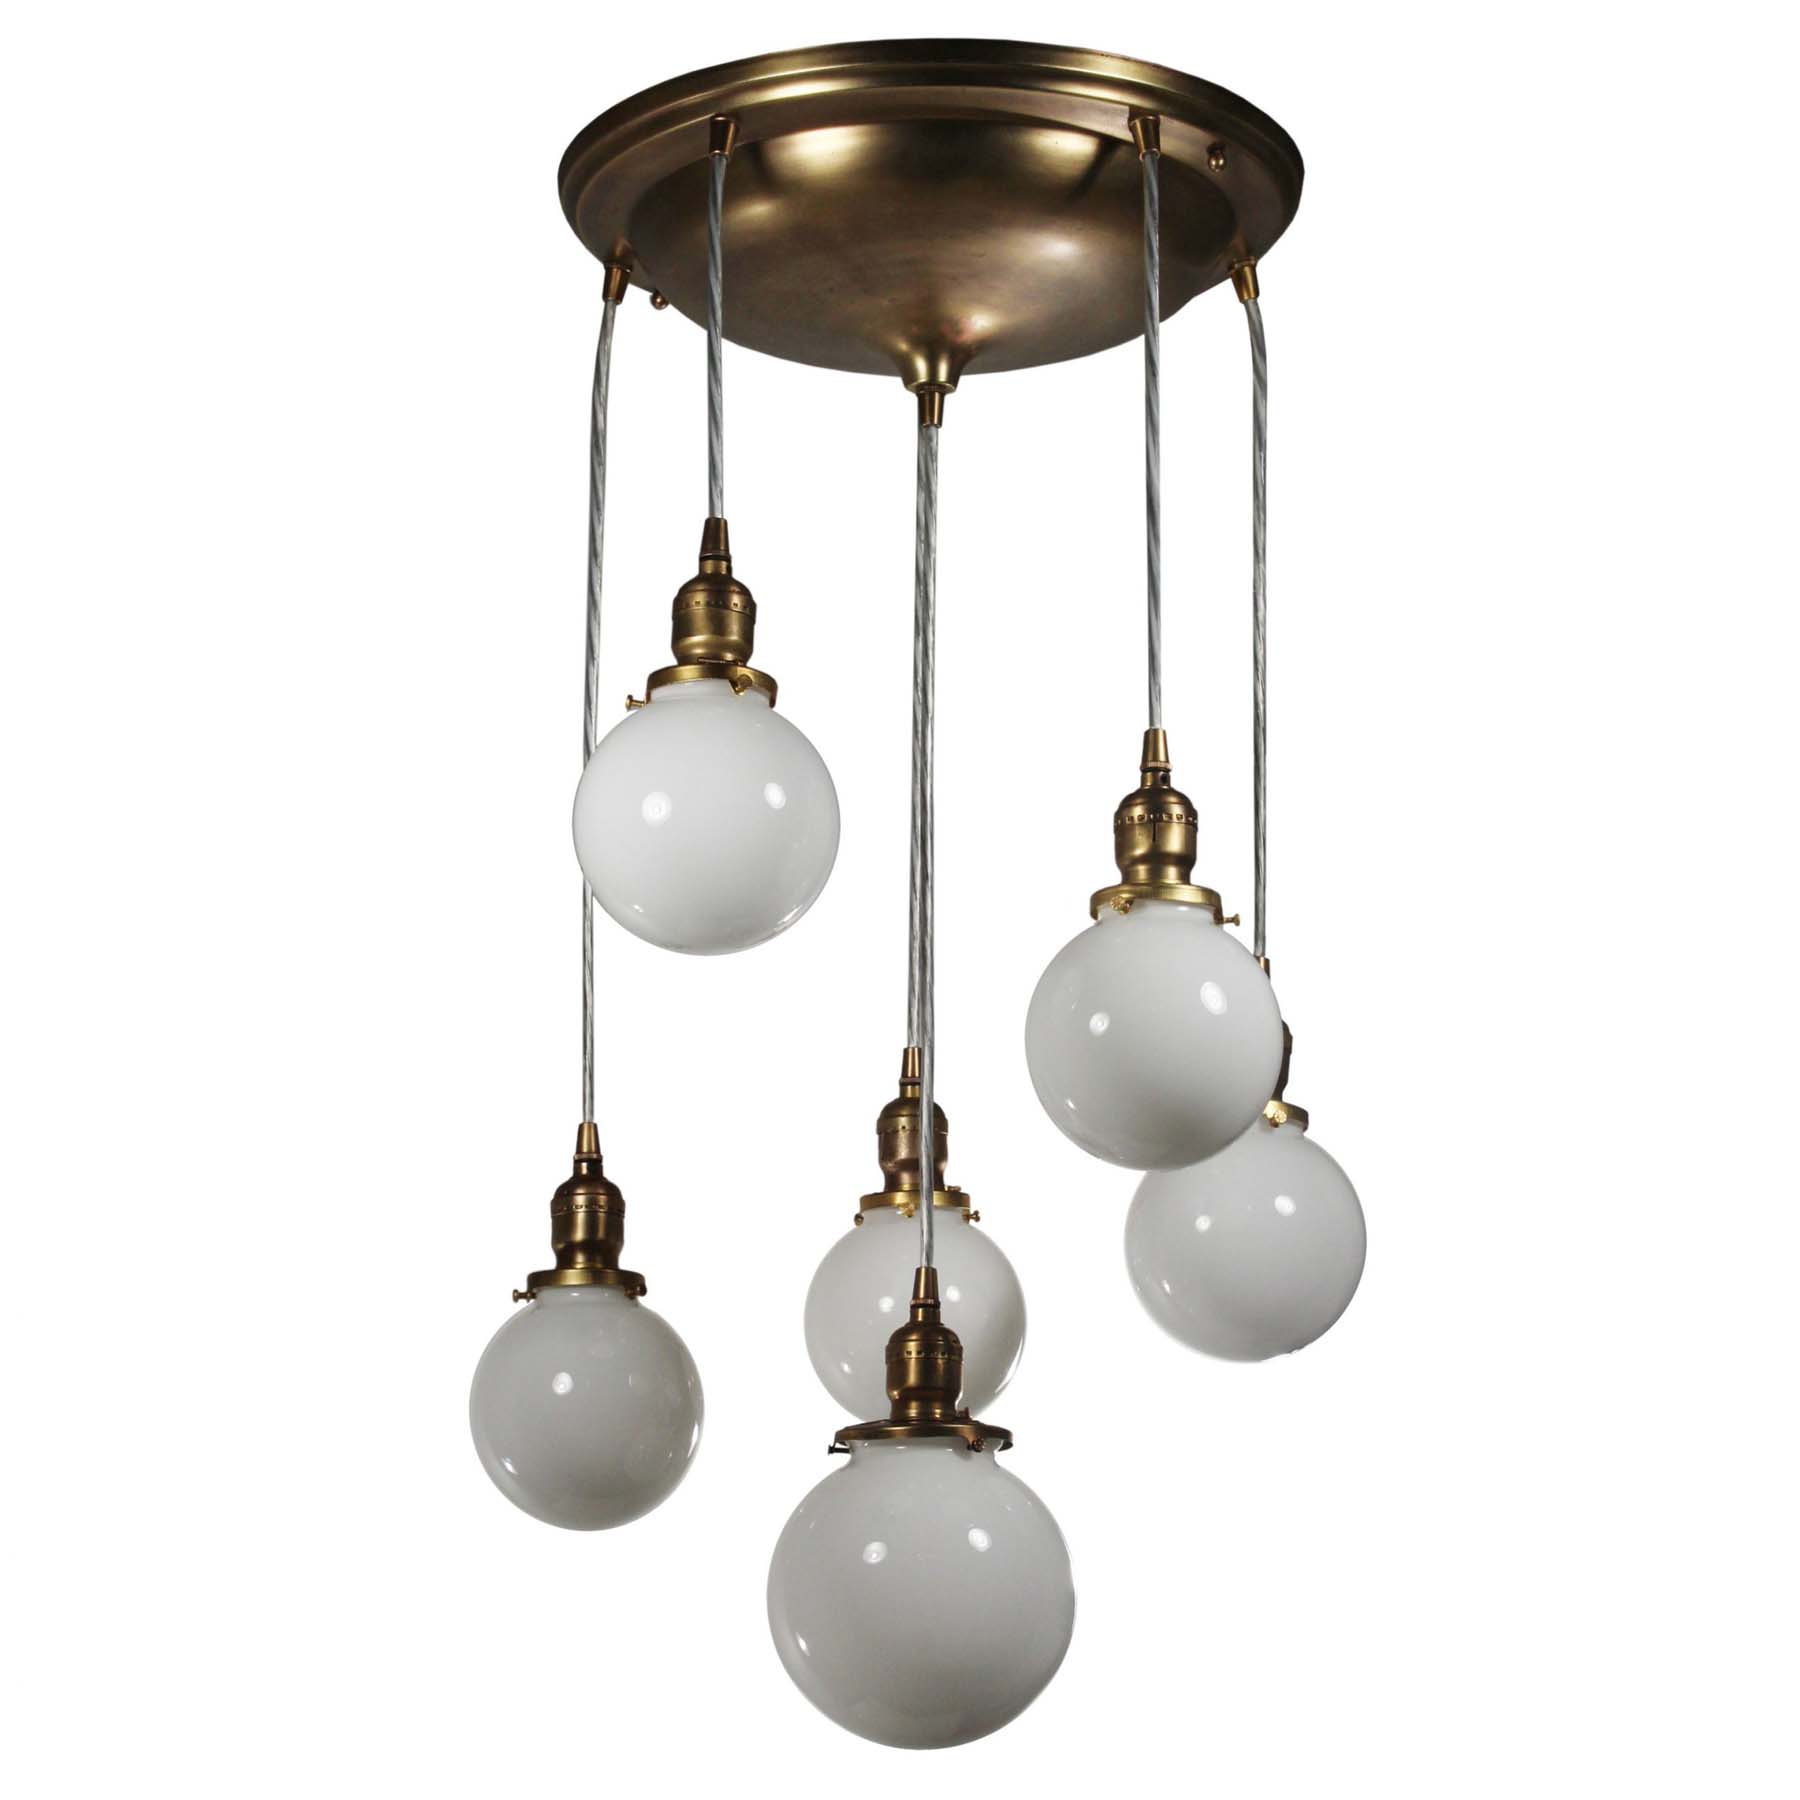 SOLD Semi Flush-Mount Chandelier with Ball Shades, Antique Lighting-0